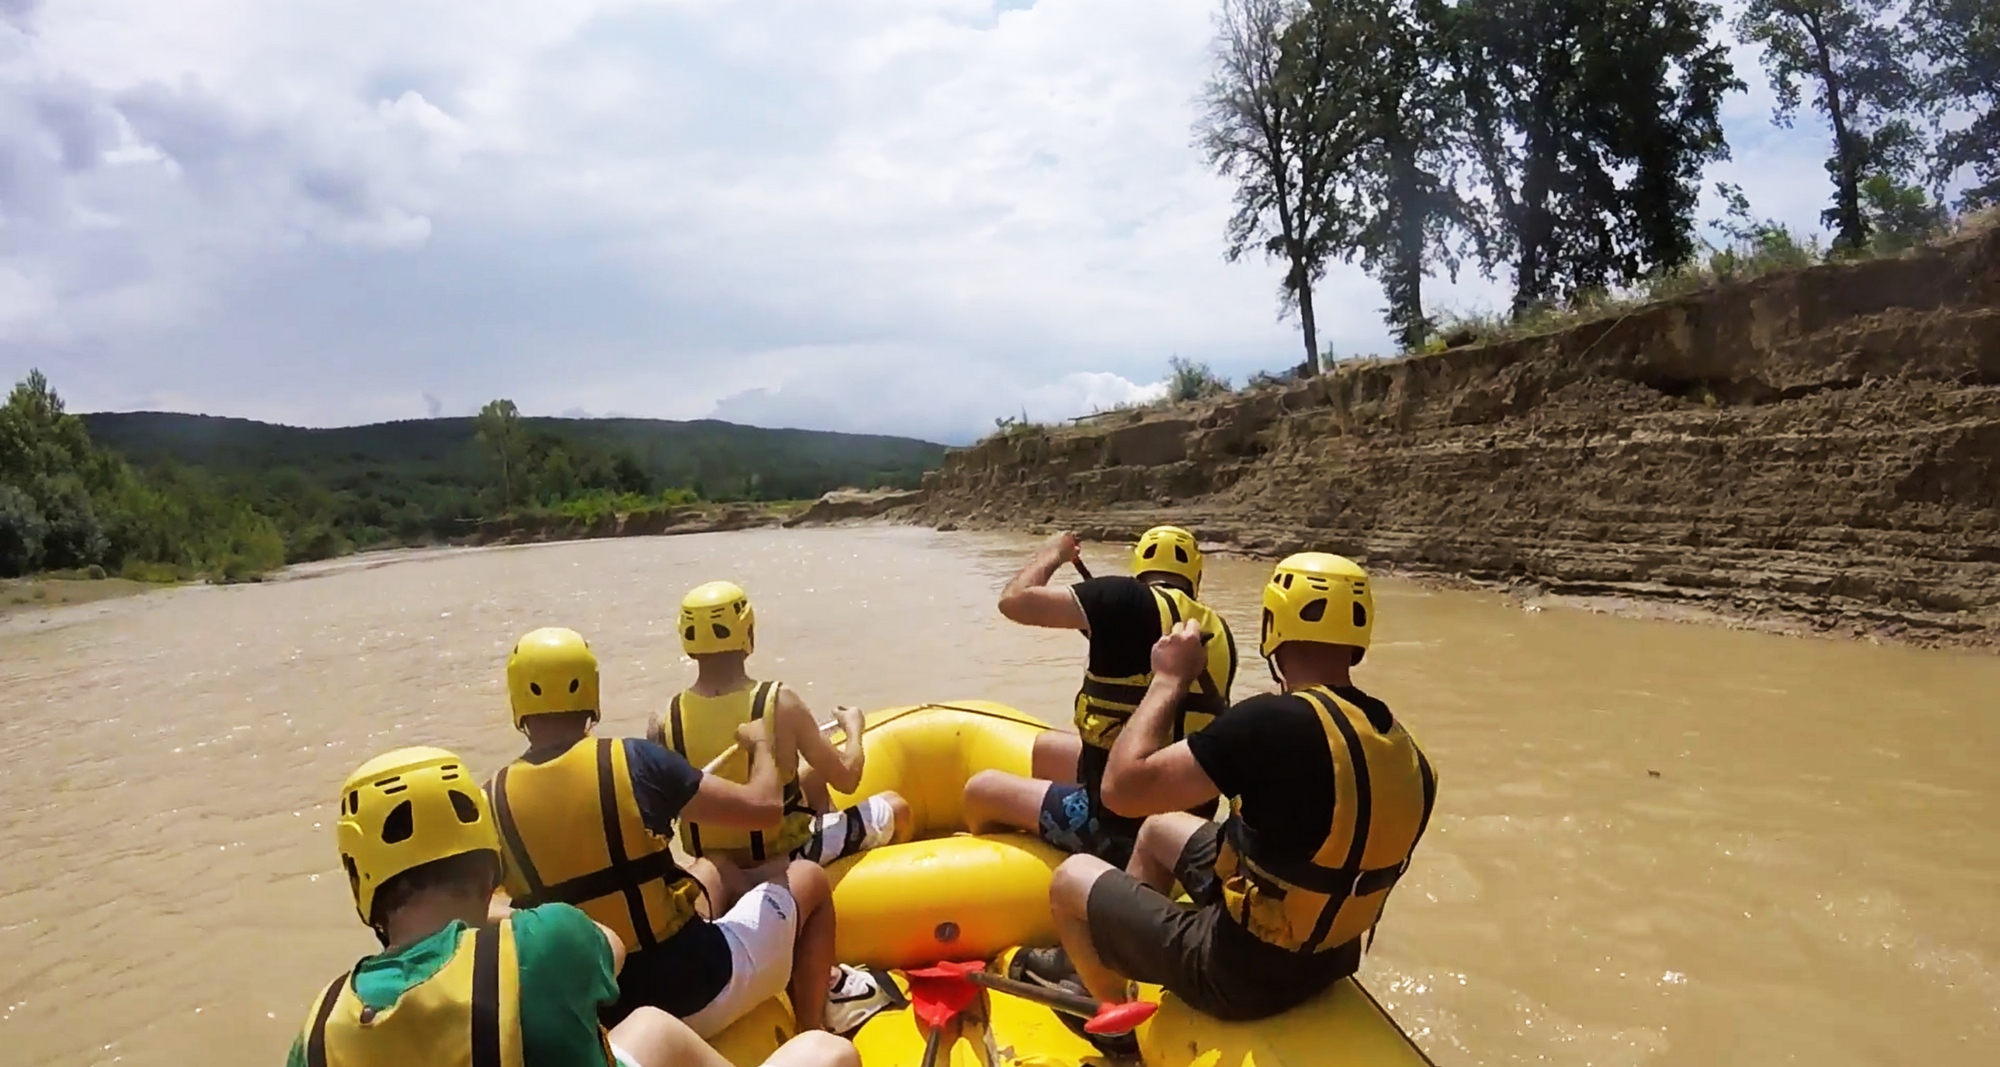 Rafting in the Maremma, along the Ombrone river